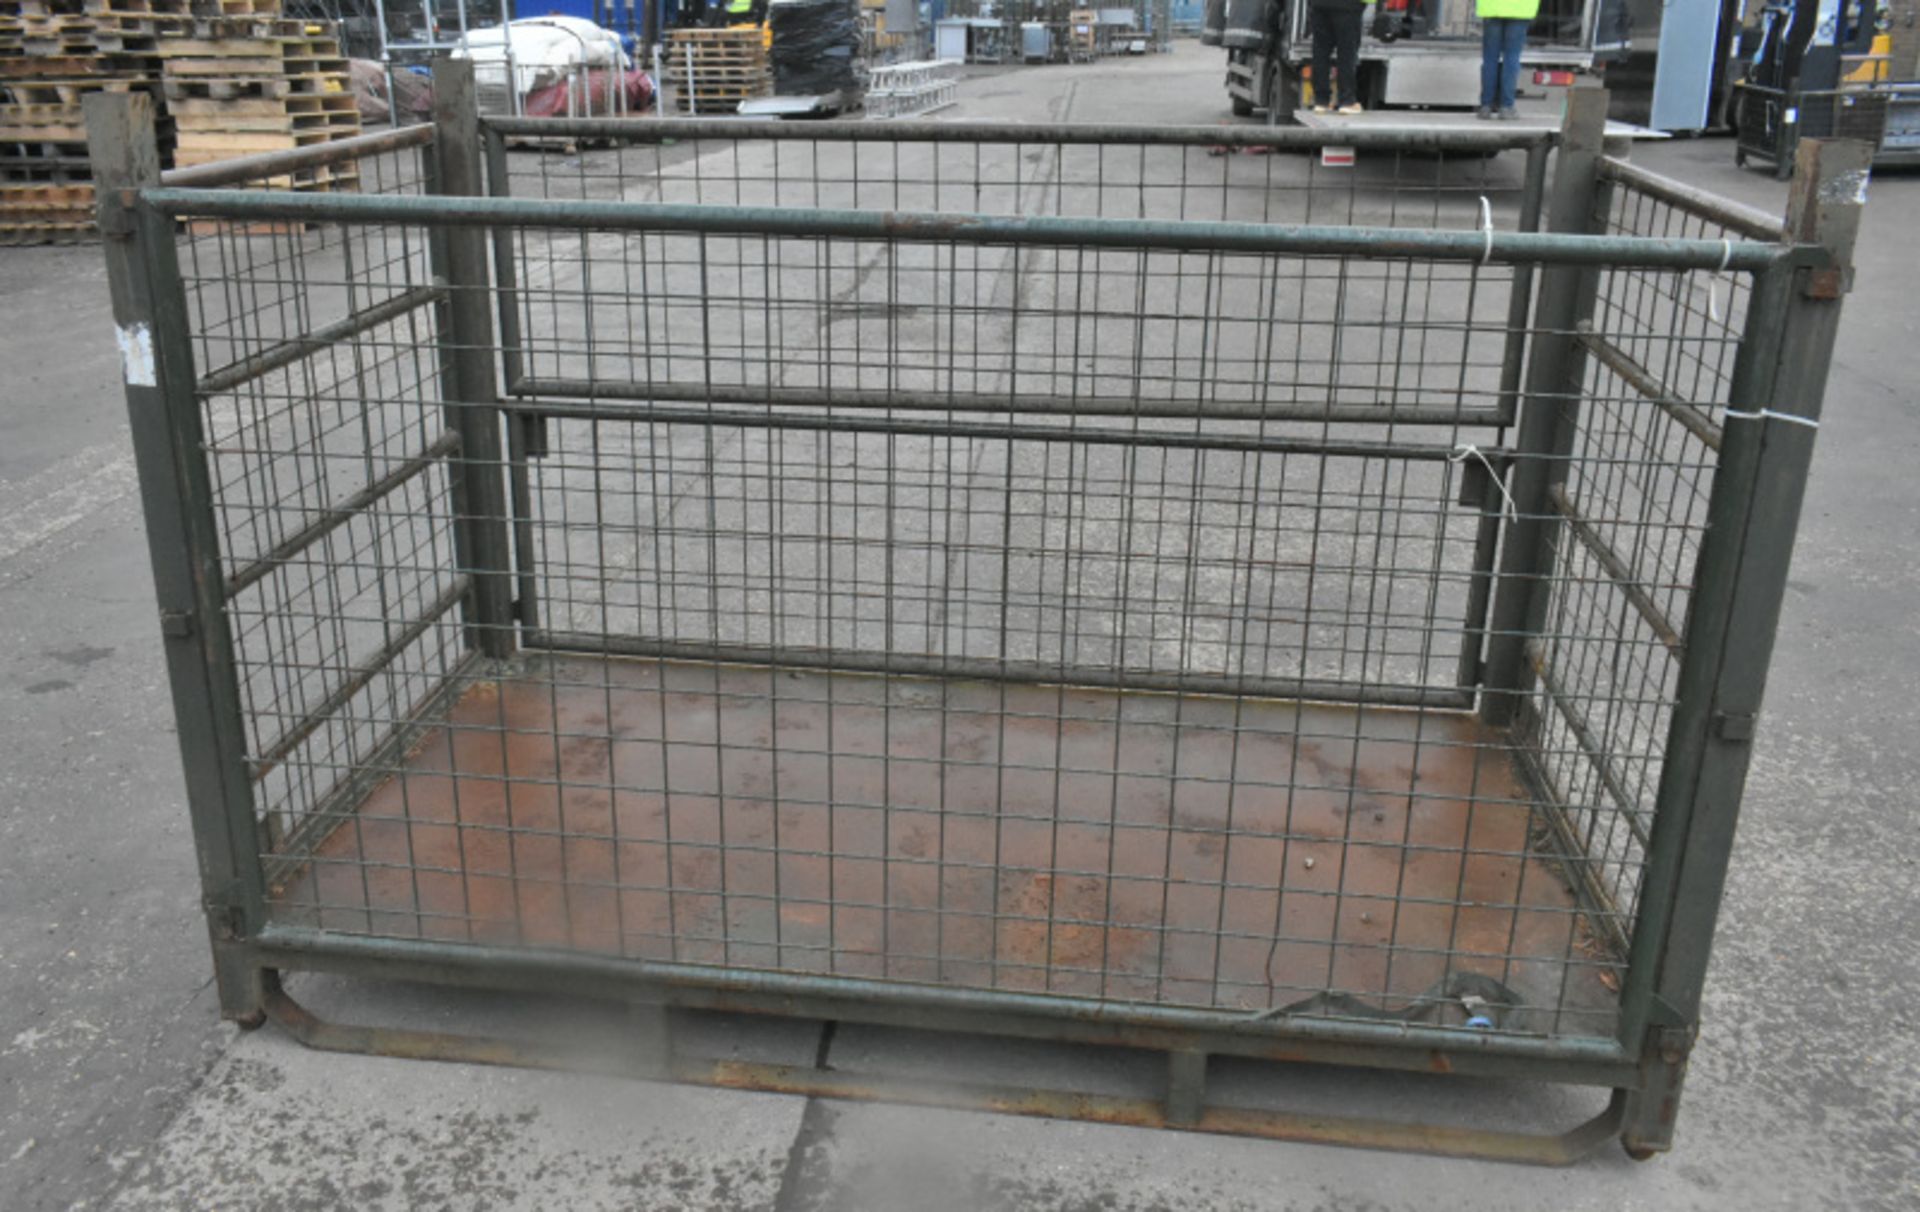 Longspan Metal Stillage - External dimensions L213 x W113 x H143cm - PLEASE SEE PICTURES FOR CONDITI - Image 3 of 4